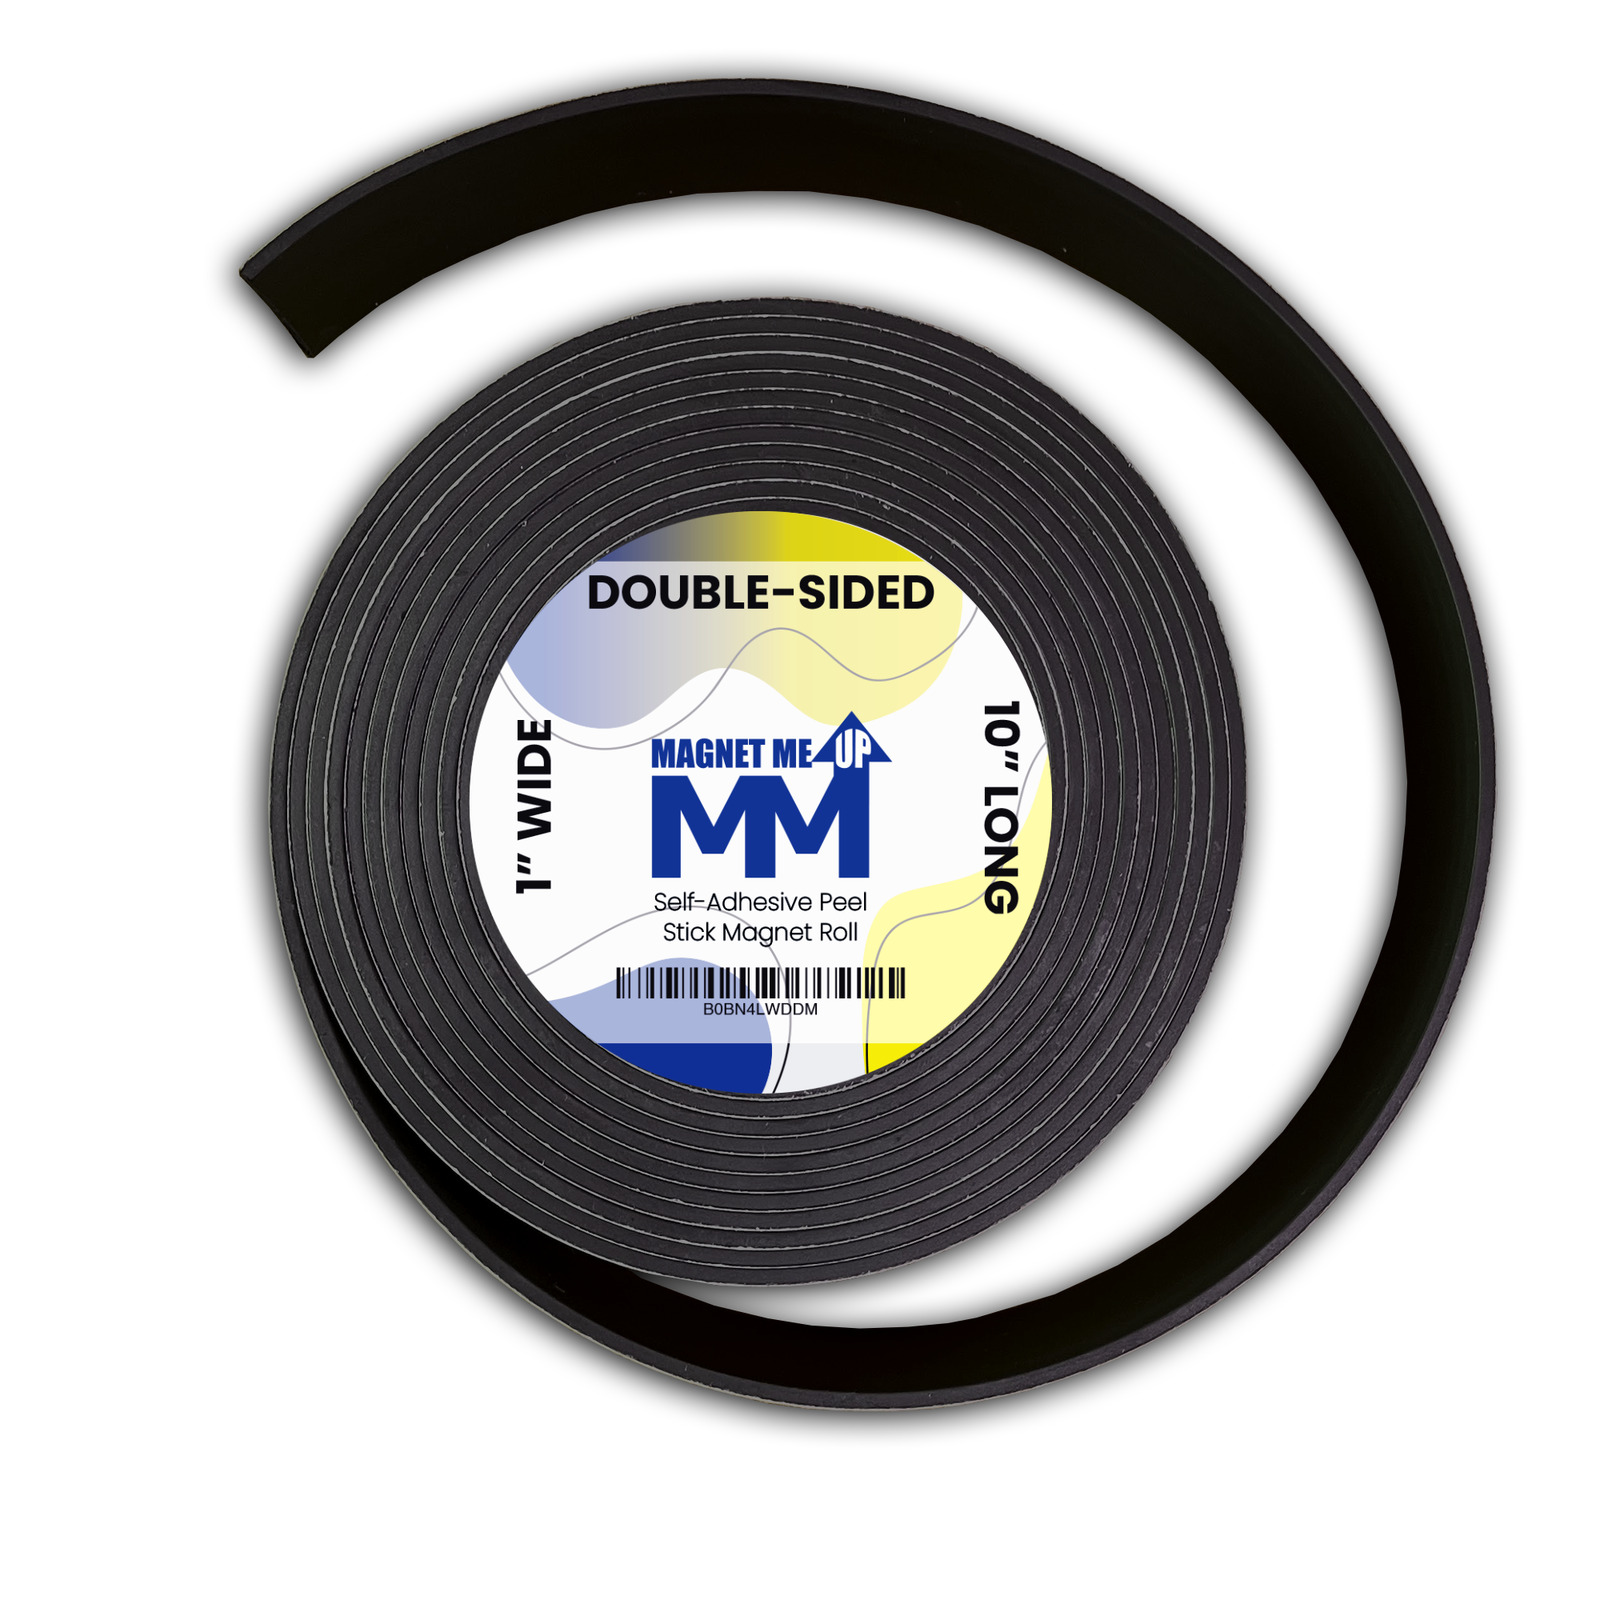 Magnet Me Up Self Adhesive Flexible Magnetic Tape, 1 inch Wide, 1/6 inch Thick